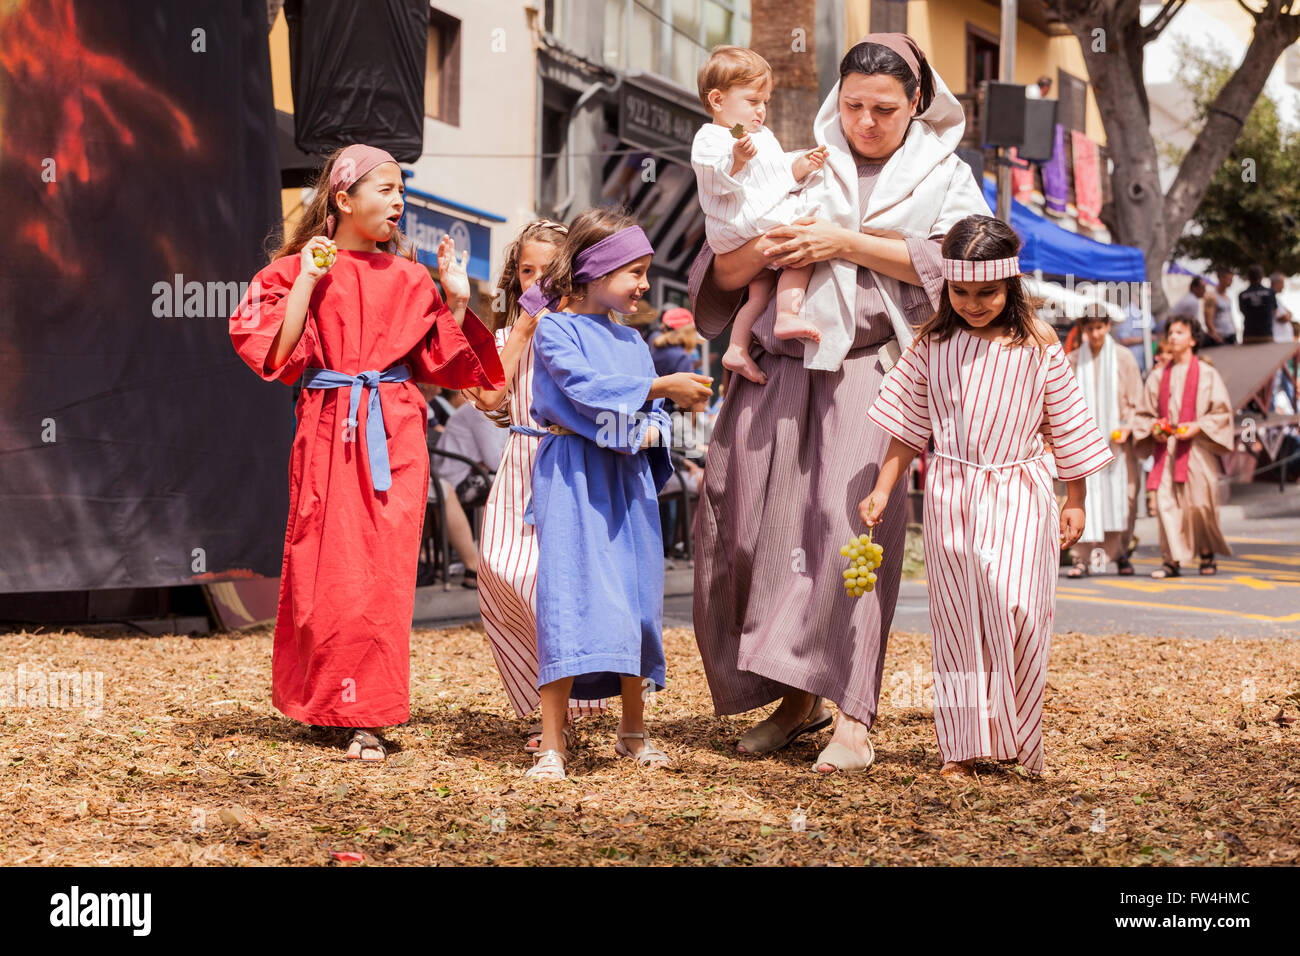 Some of the over 300 amateur actors who partake in the annual Passion Play in Adeje, Tenerife, Canary Islands, Spain. Representa Stock Photo